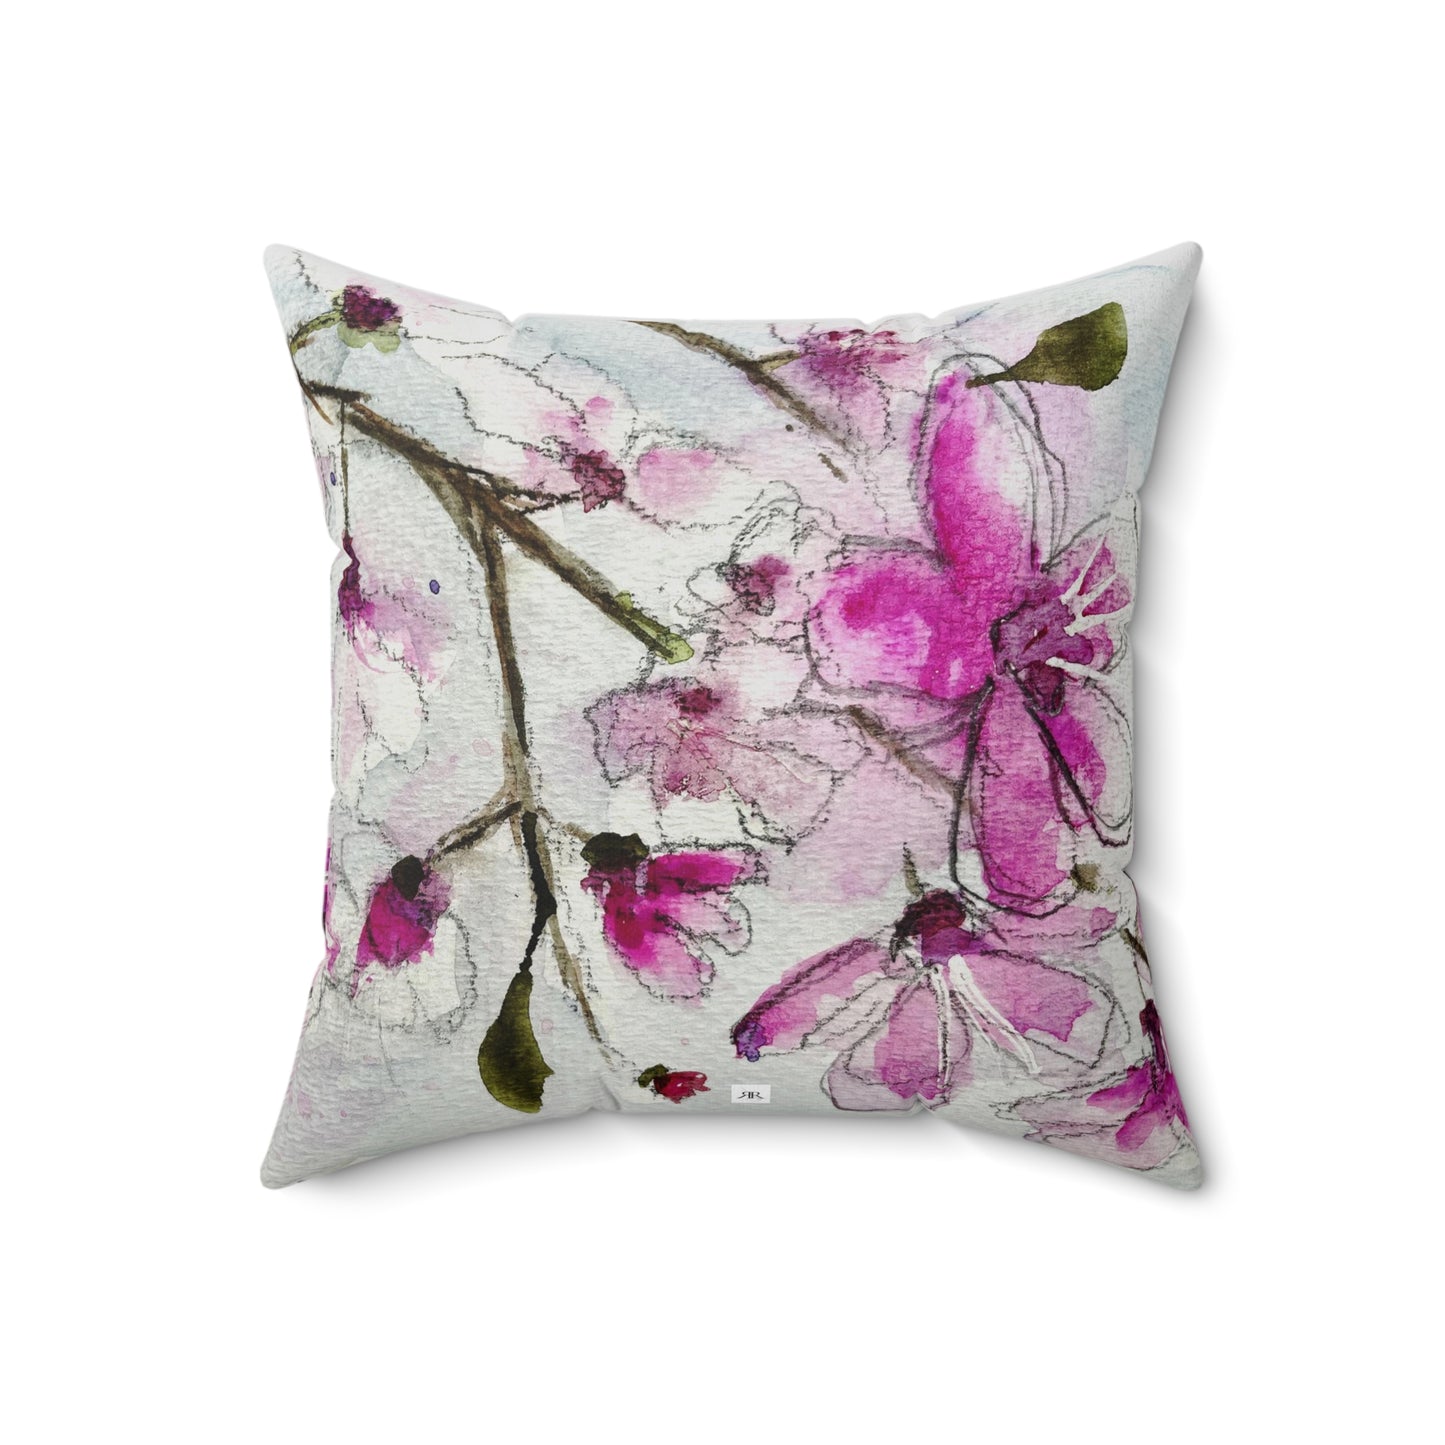 Cherry Blossoms #3 Indoor Spun Polyester Square Pillow